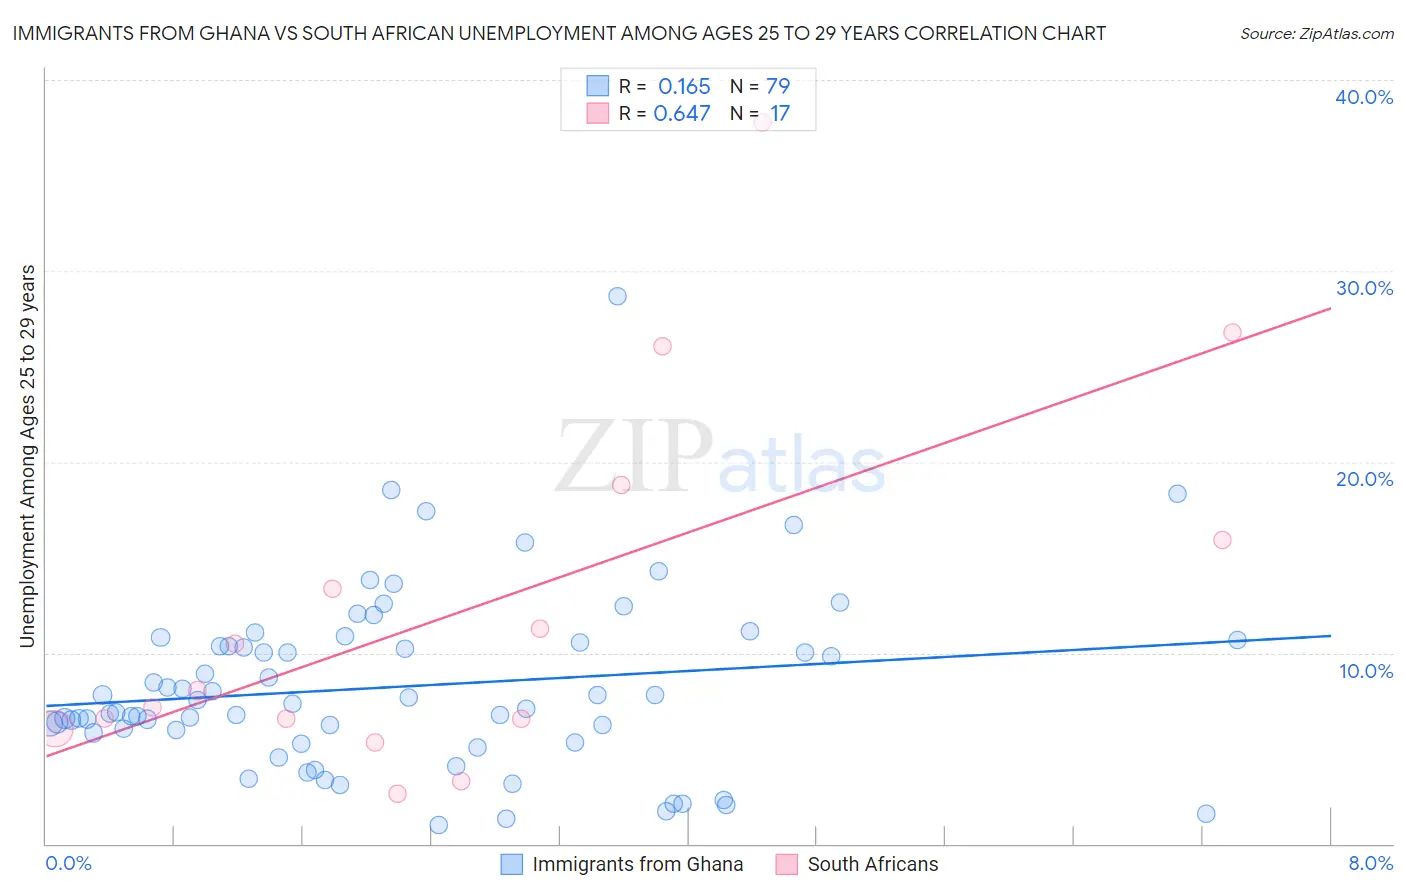 Immigrants from Ghana vs South African Unemployment Among Ages 25 to 29 years